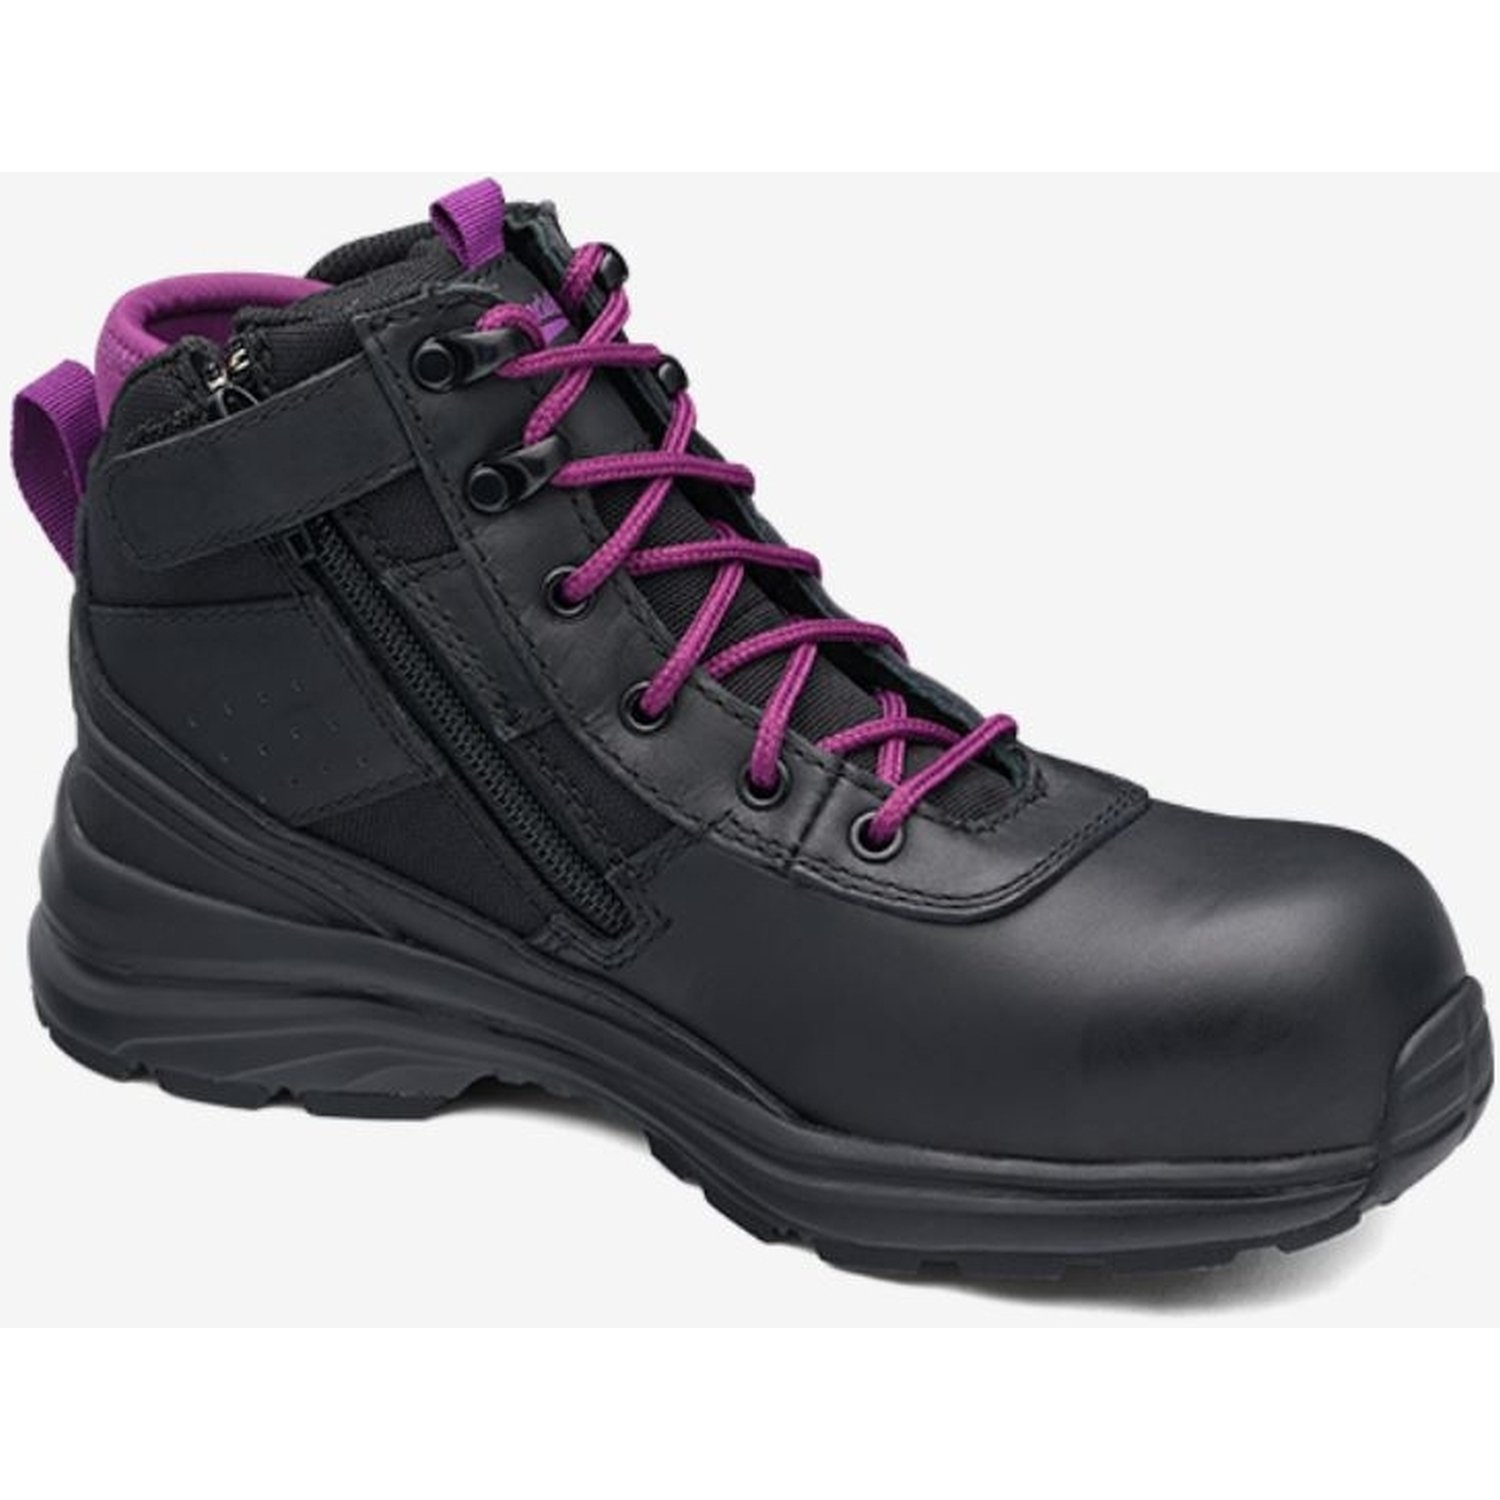 Blundstone 887 Women's Lace Up Zip Side Safety Boot